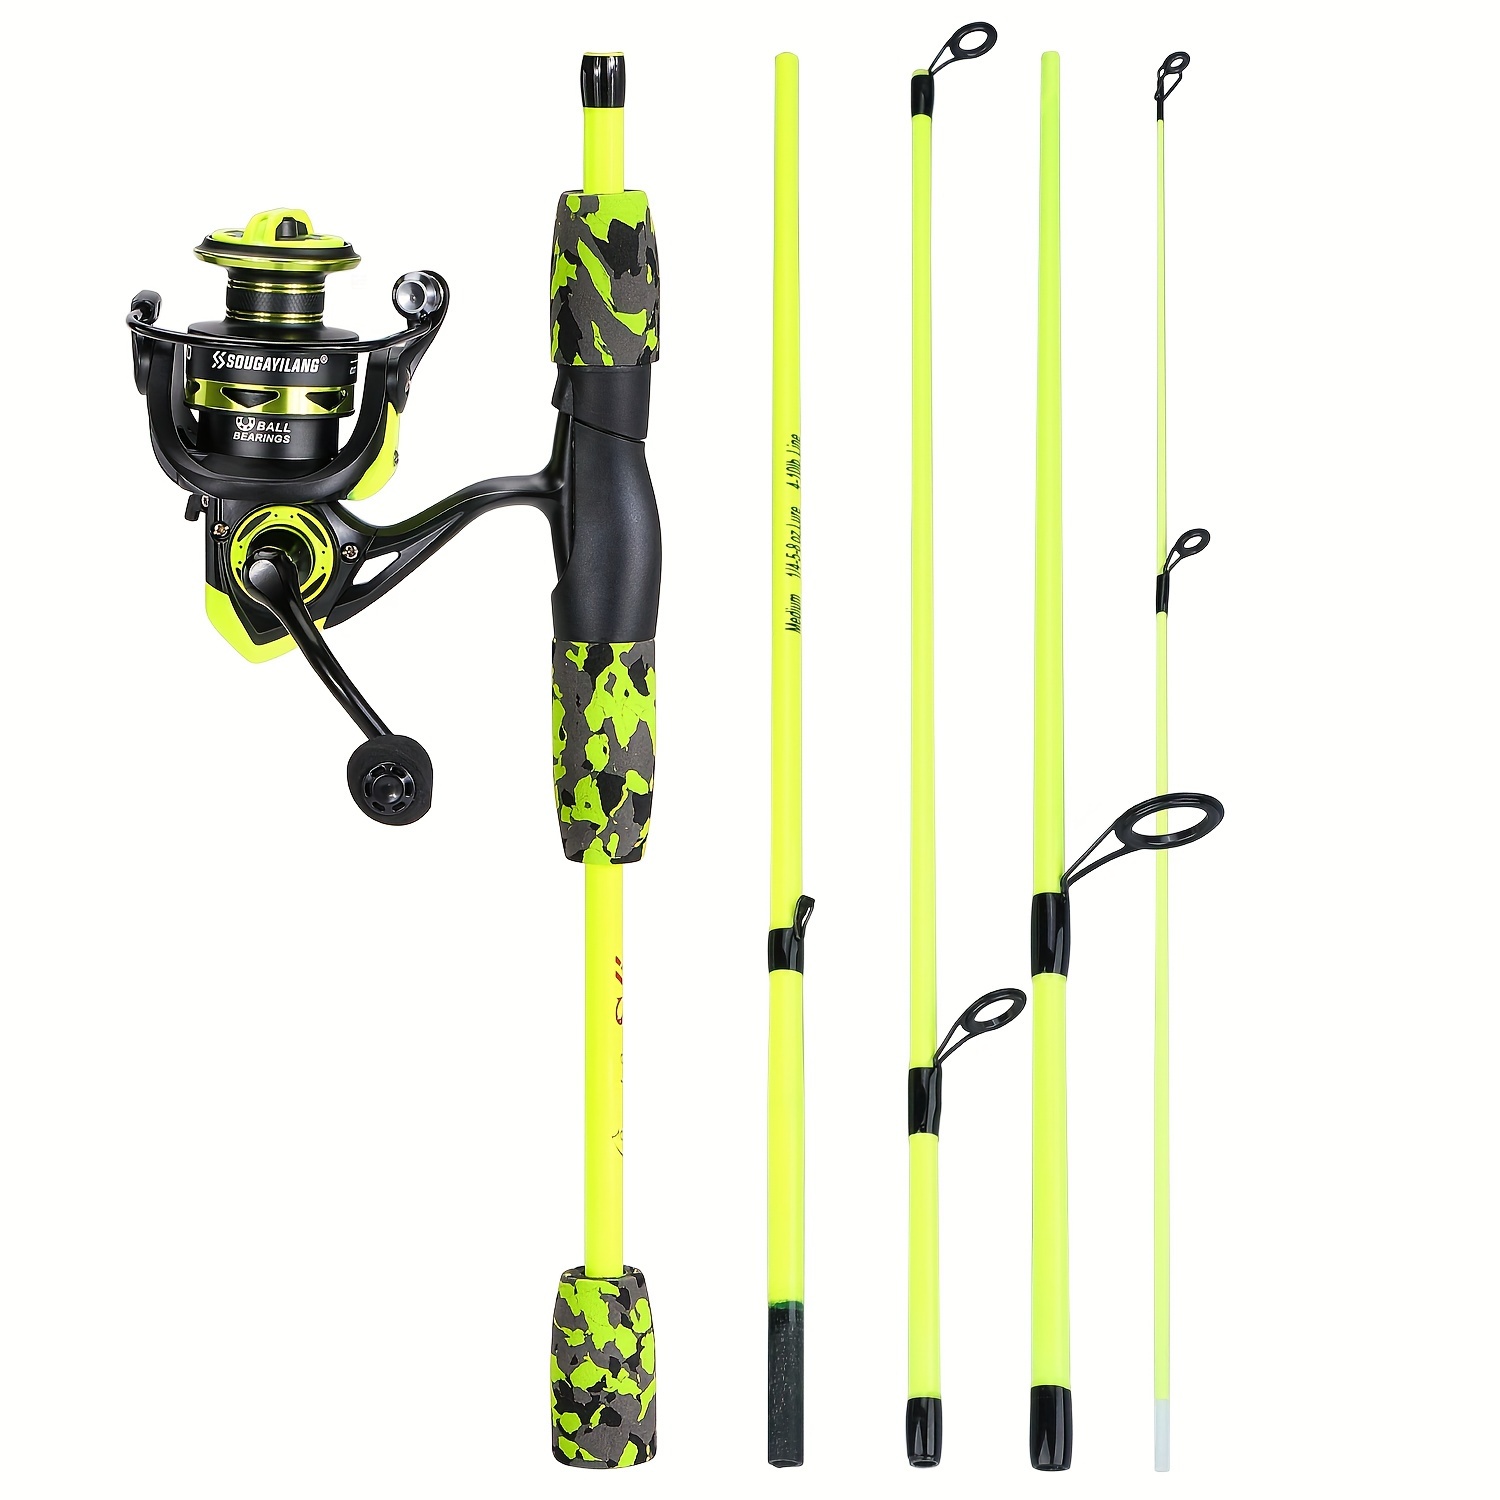 Sougayilang Spinning Fishing Combo, 5 Sections Glass Material Fishing Rod  And 1000/2000 Spinning Reel, Artificial Fishing Bait, Fishing Accessories